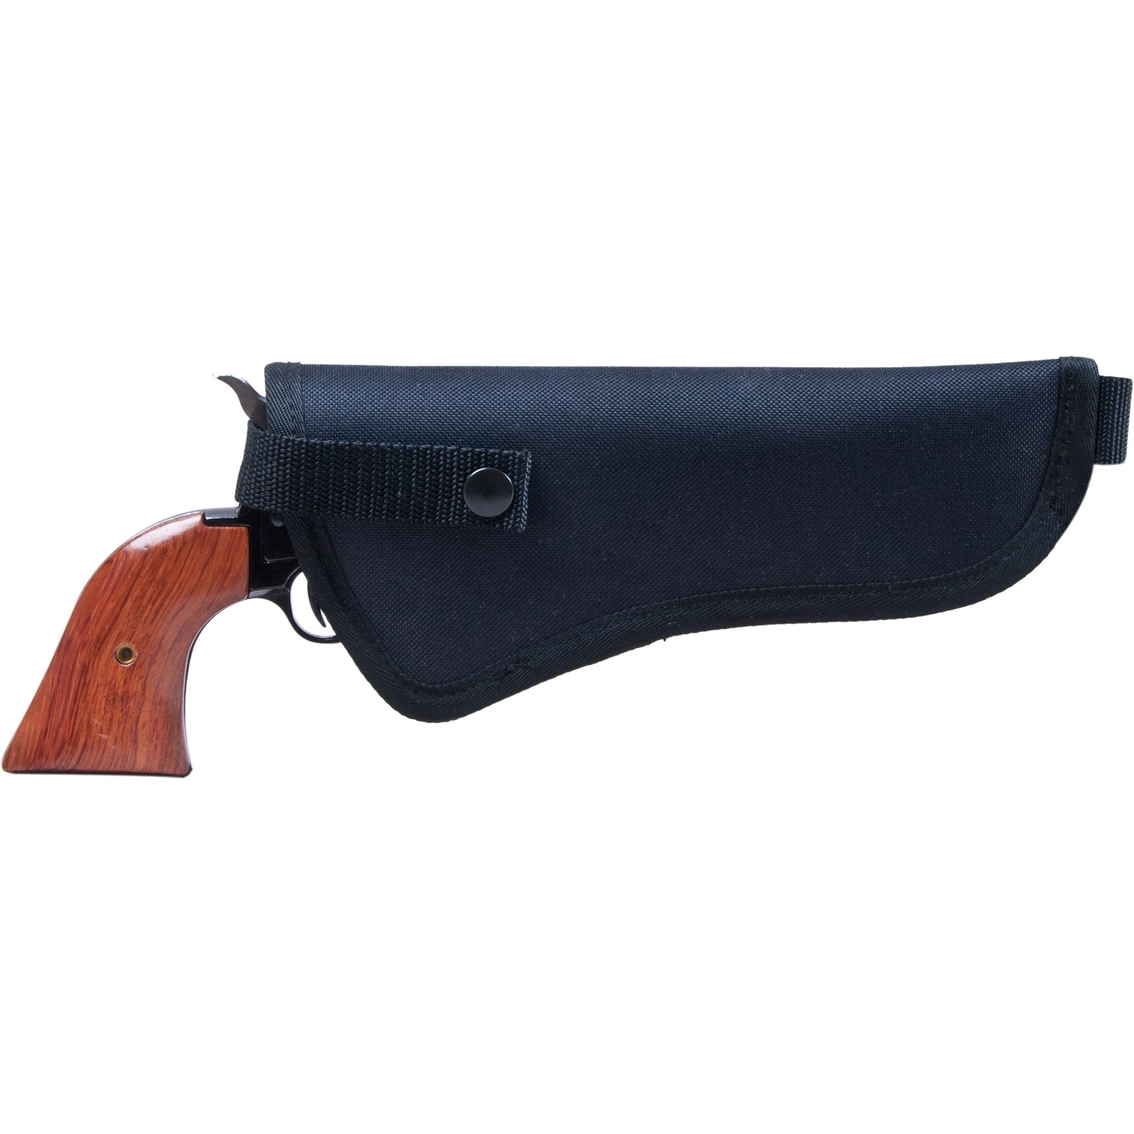 Heritage Rough Rider 22 LR 22 WMR 6.5 in. Barrel 6 Rds Revolver Blued with Holster - Image 3 of 4